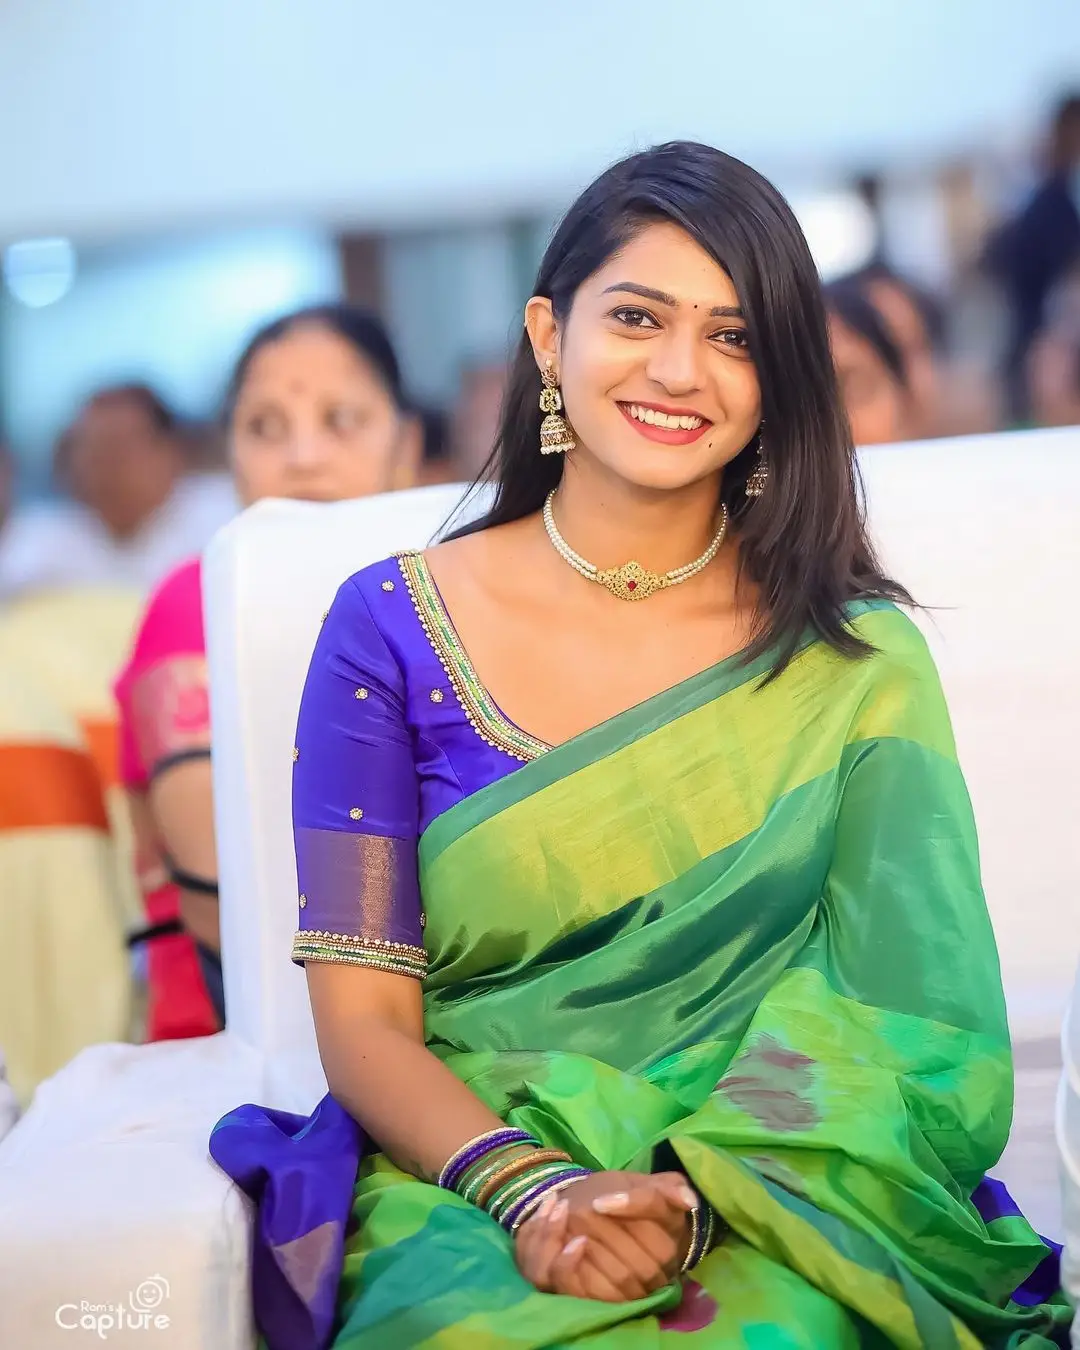 NISARGA GOWDA IN SOUTH INDIAN TRADITIONAL GREEN SAREE BLUE BLOUSE 2